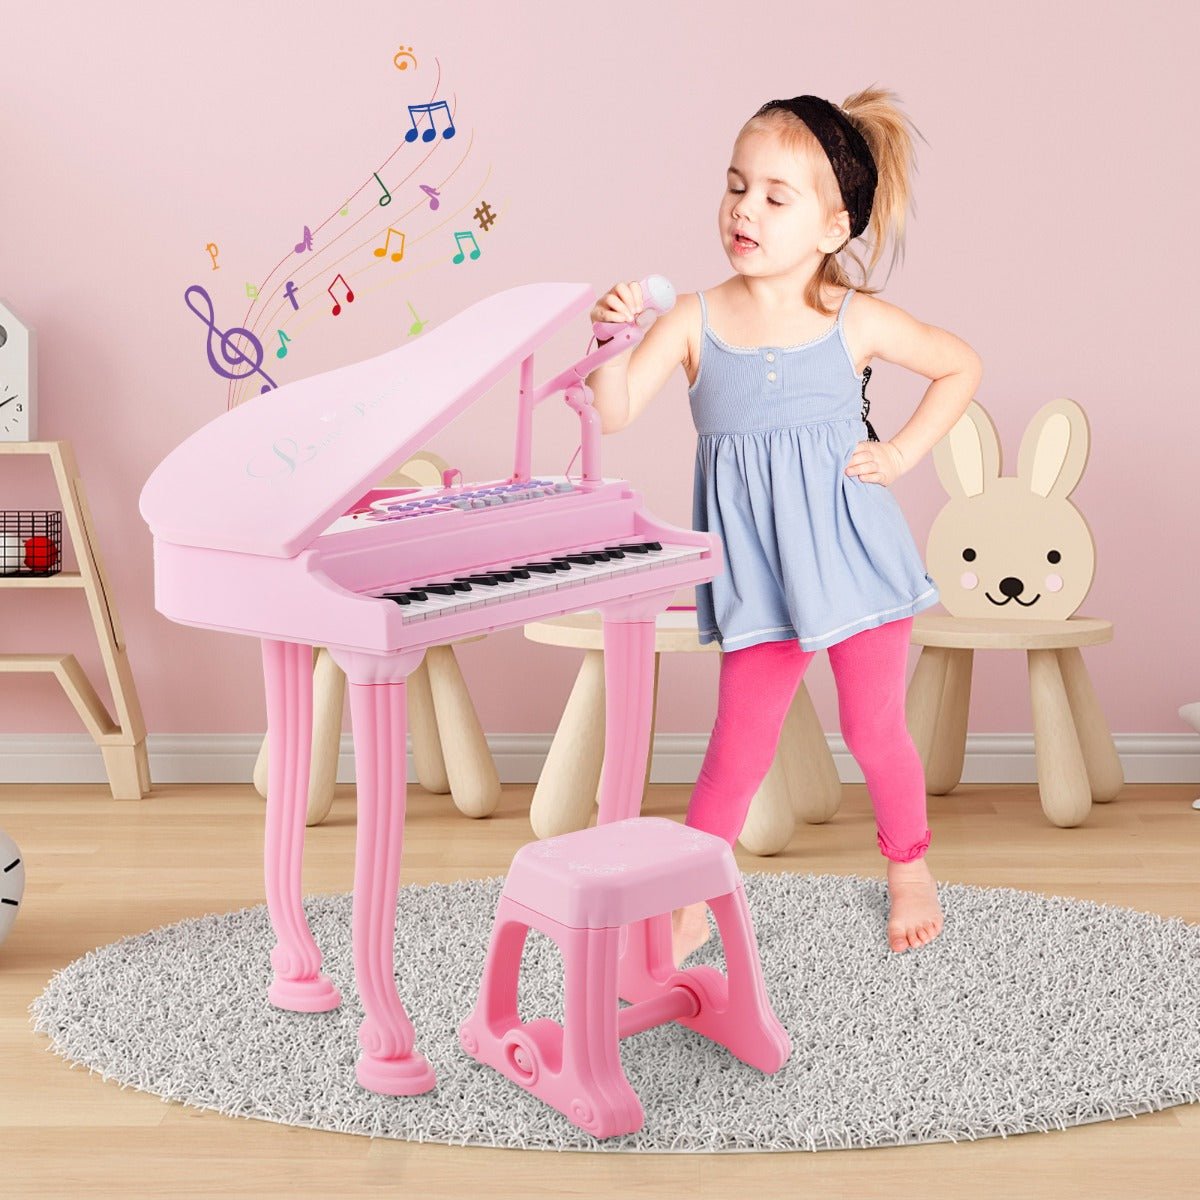 Shop Now for Musical Fun